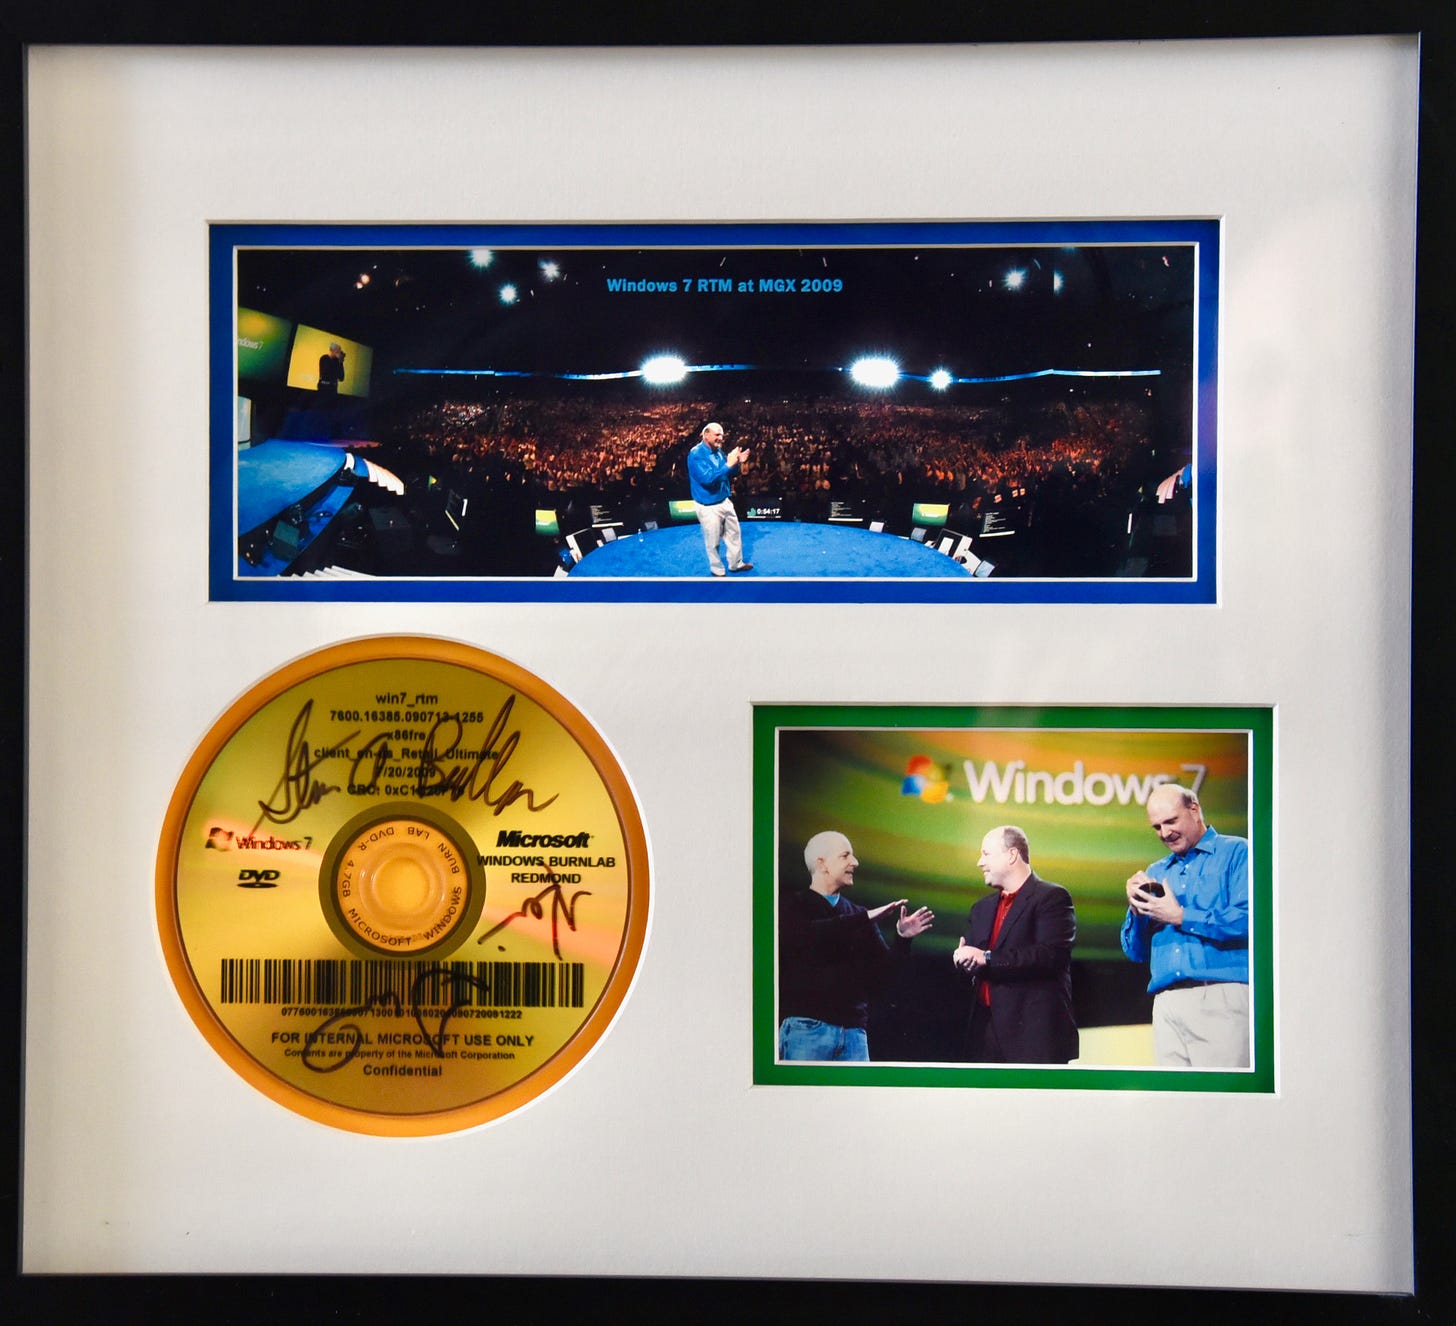 A framed Lightbox featuring a stage photo of Steve Ballmer and the crowd, a signed DVD, and a photo of me on stage with Steve and Kevin Turner signing the DVD